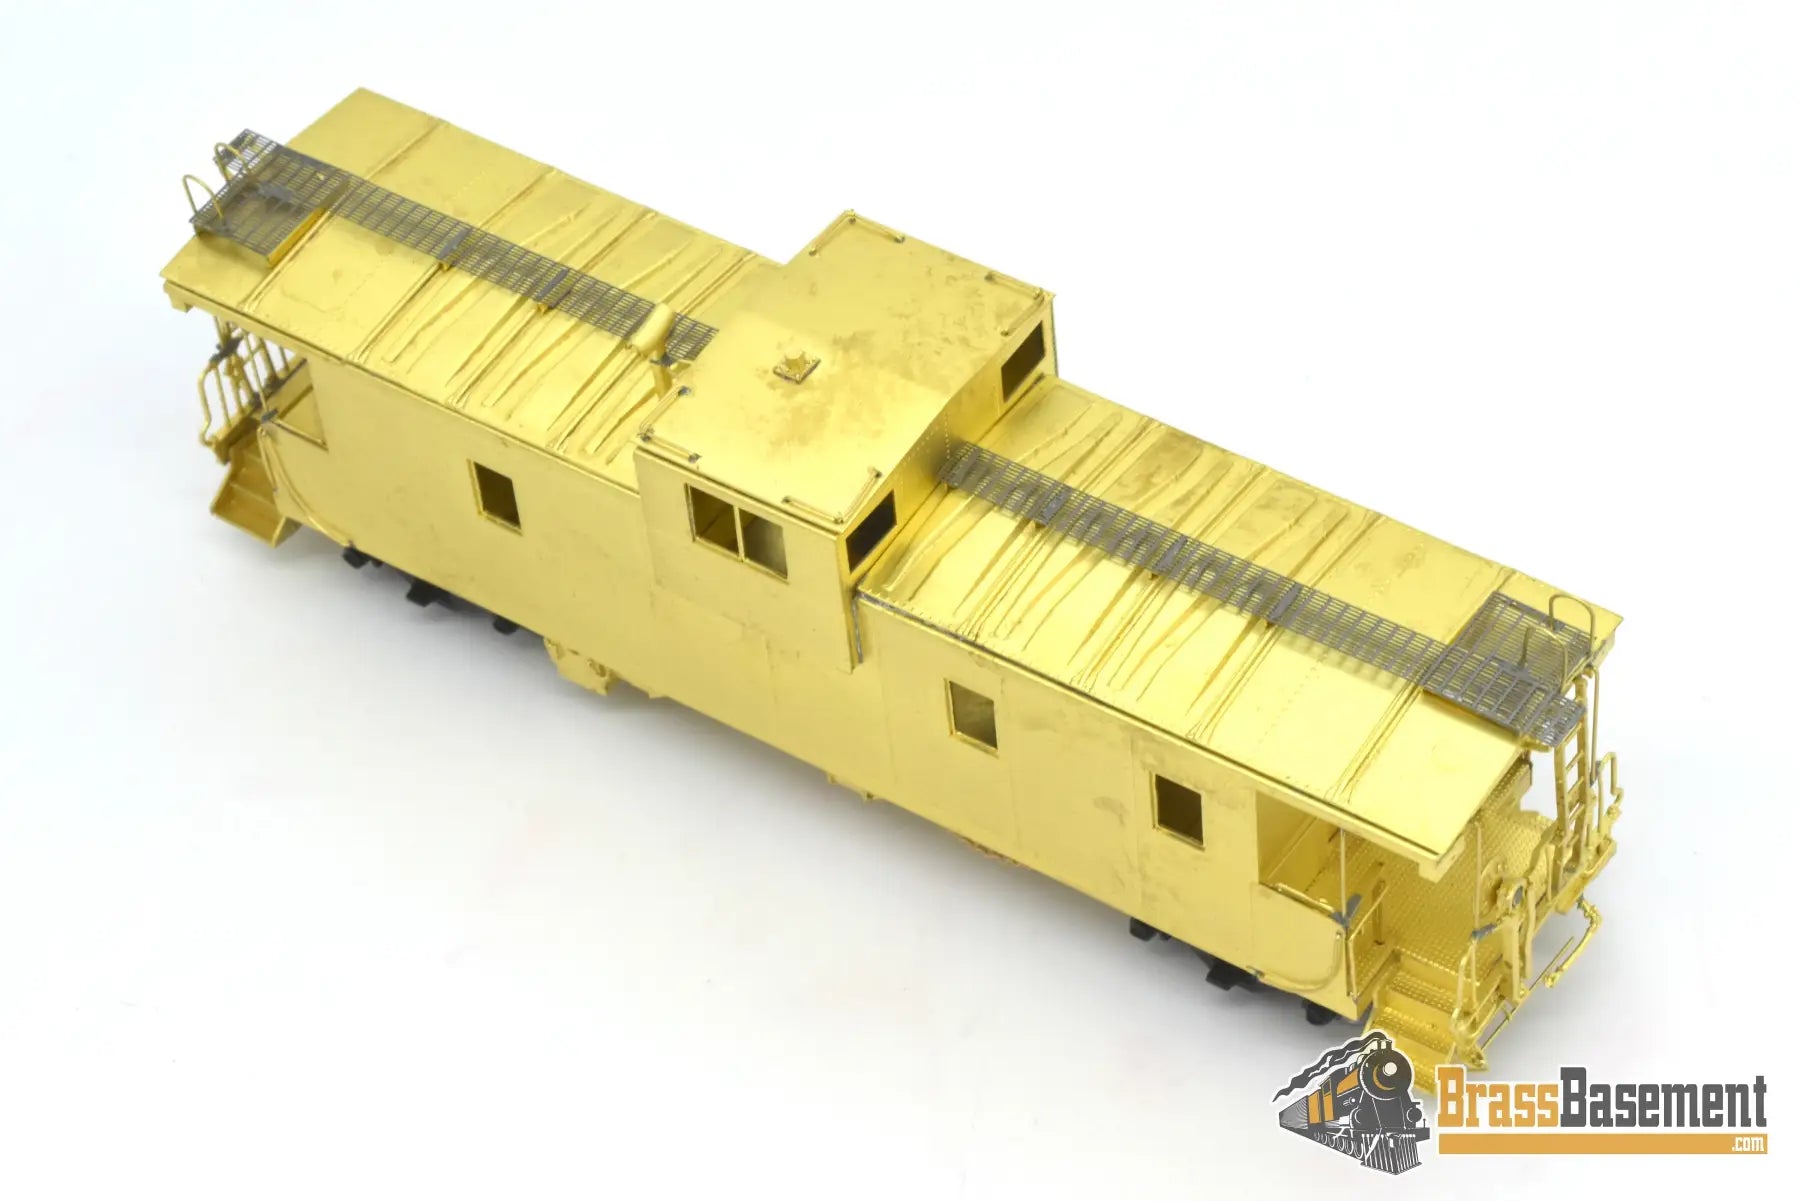 Ho Brass - Omi 1289 Illinois Central ’Extended’ Vision Caboose Pullman Standard Roof